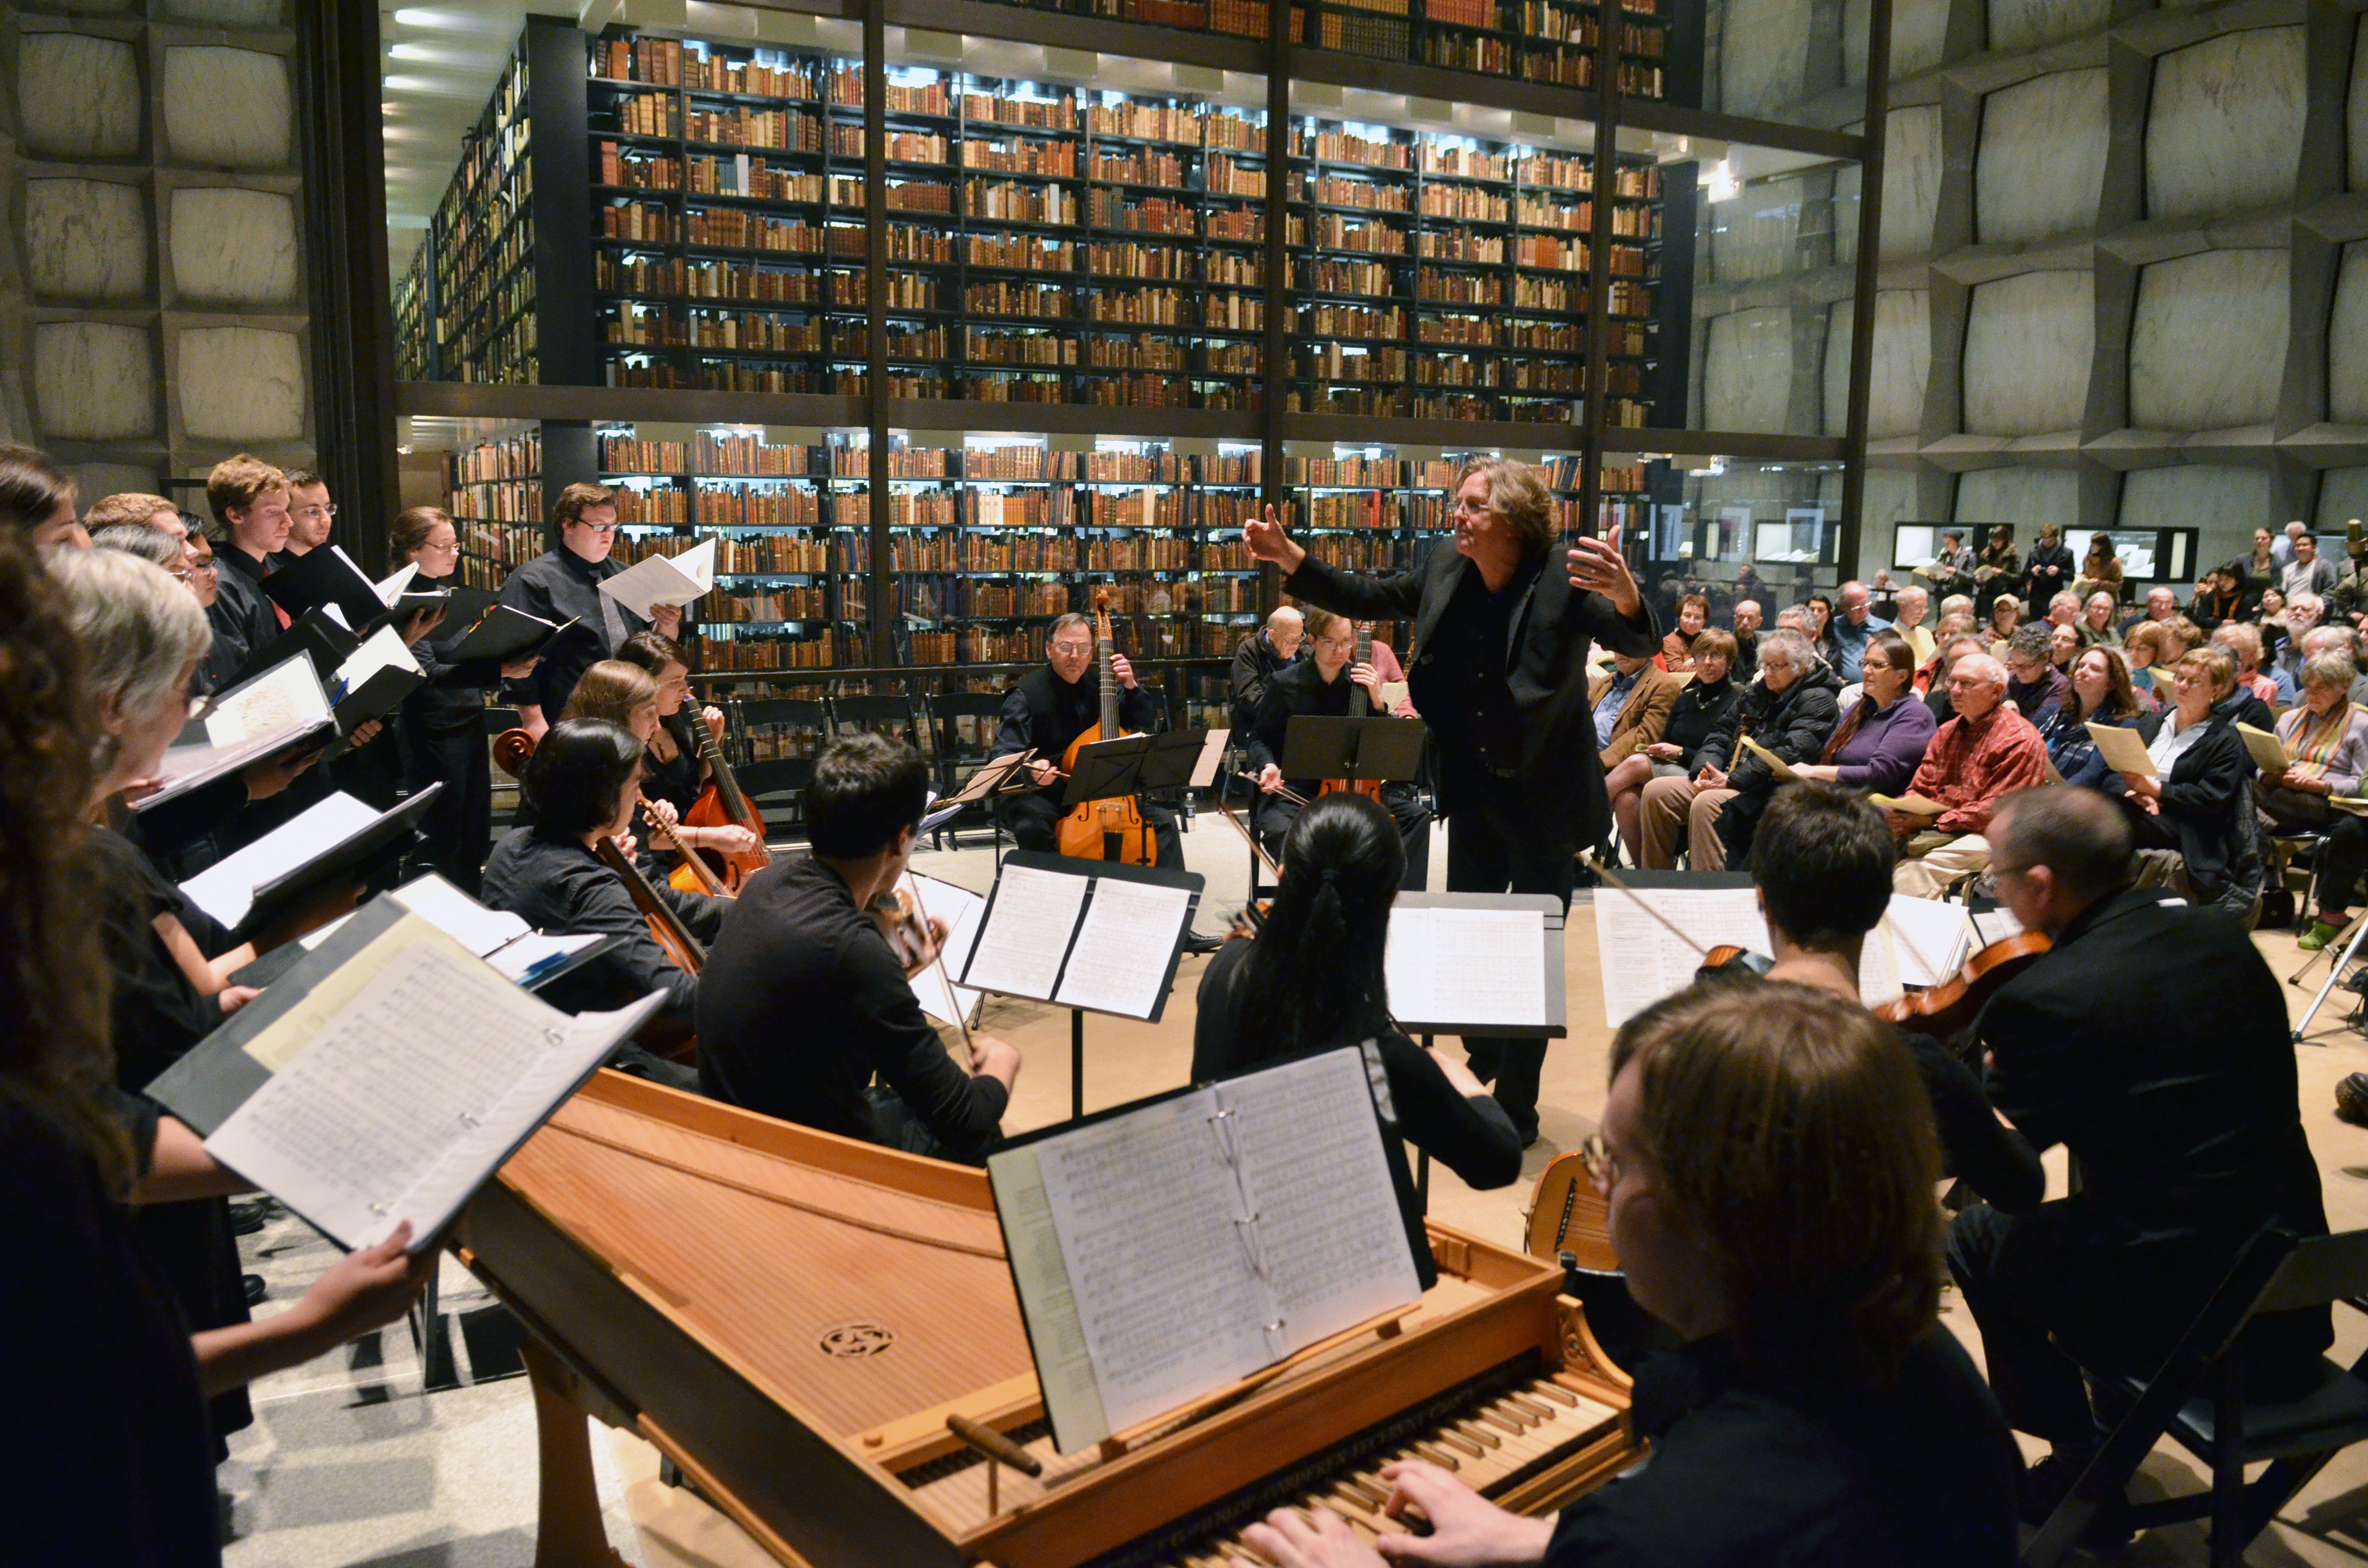 Students perform a concert in the Beinecke Library